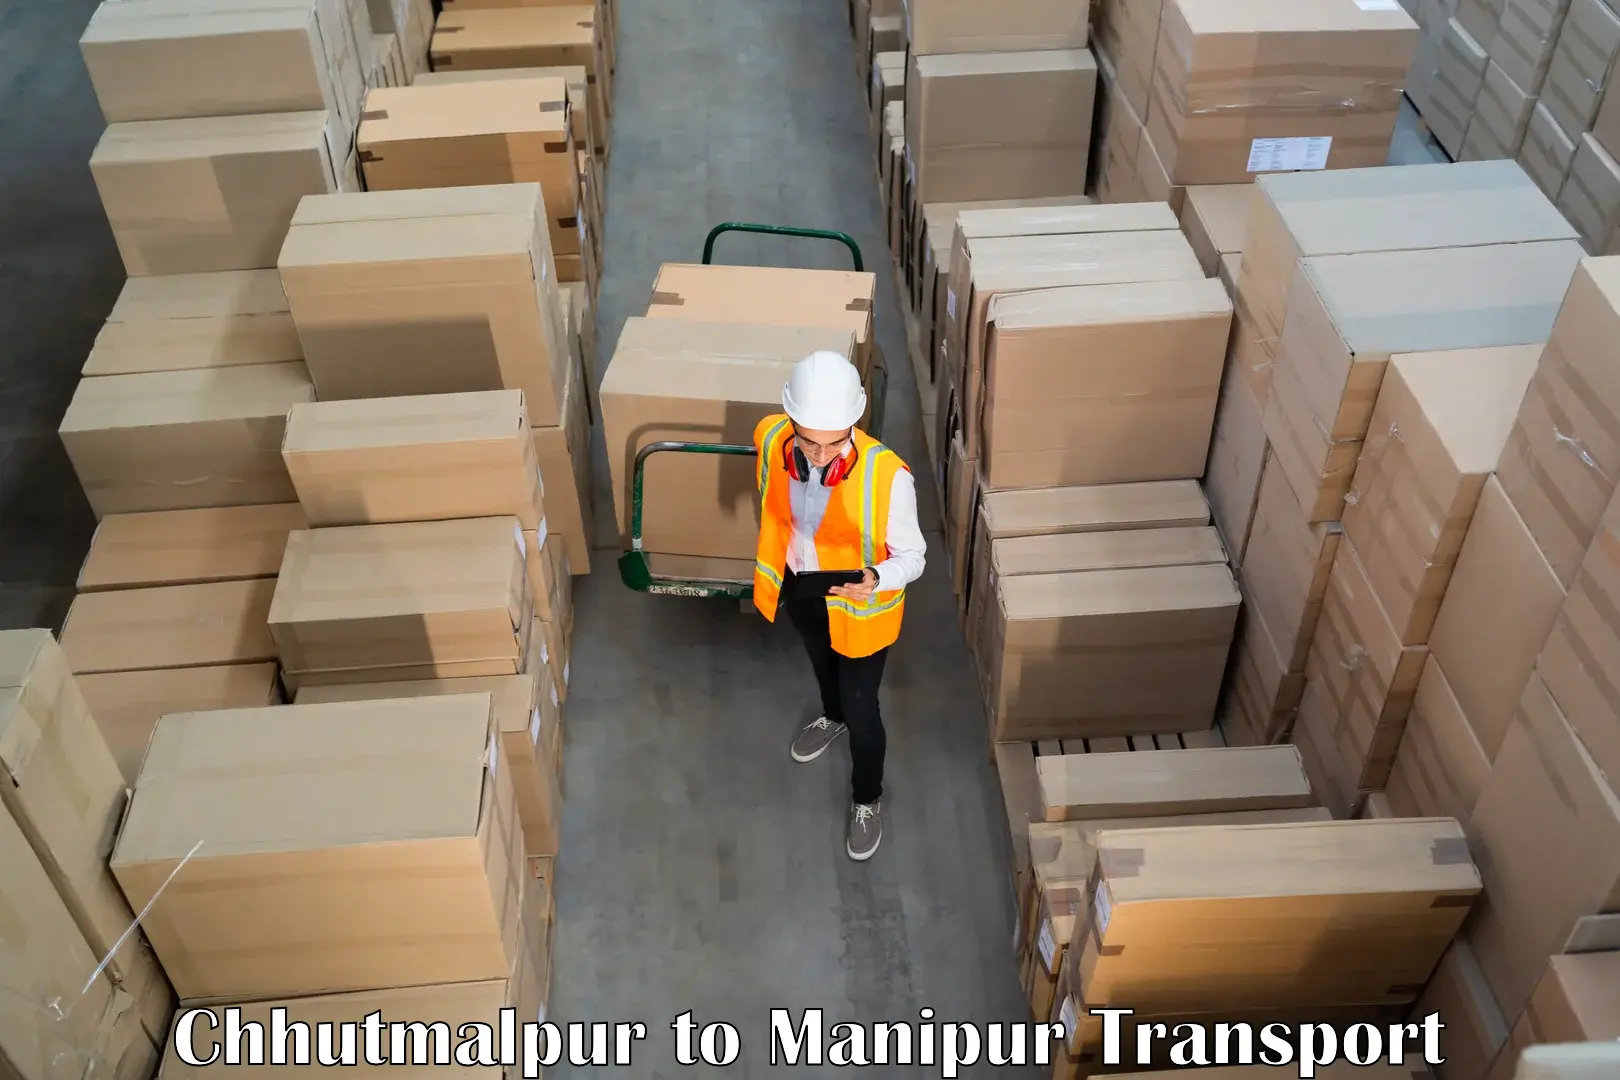 Container transport service Chhutmalpur to Imphal